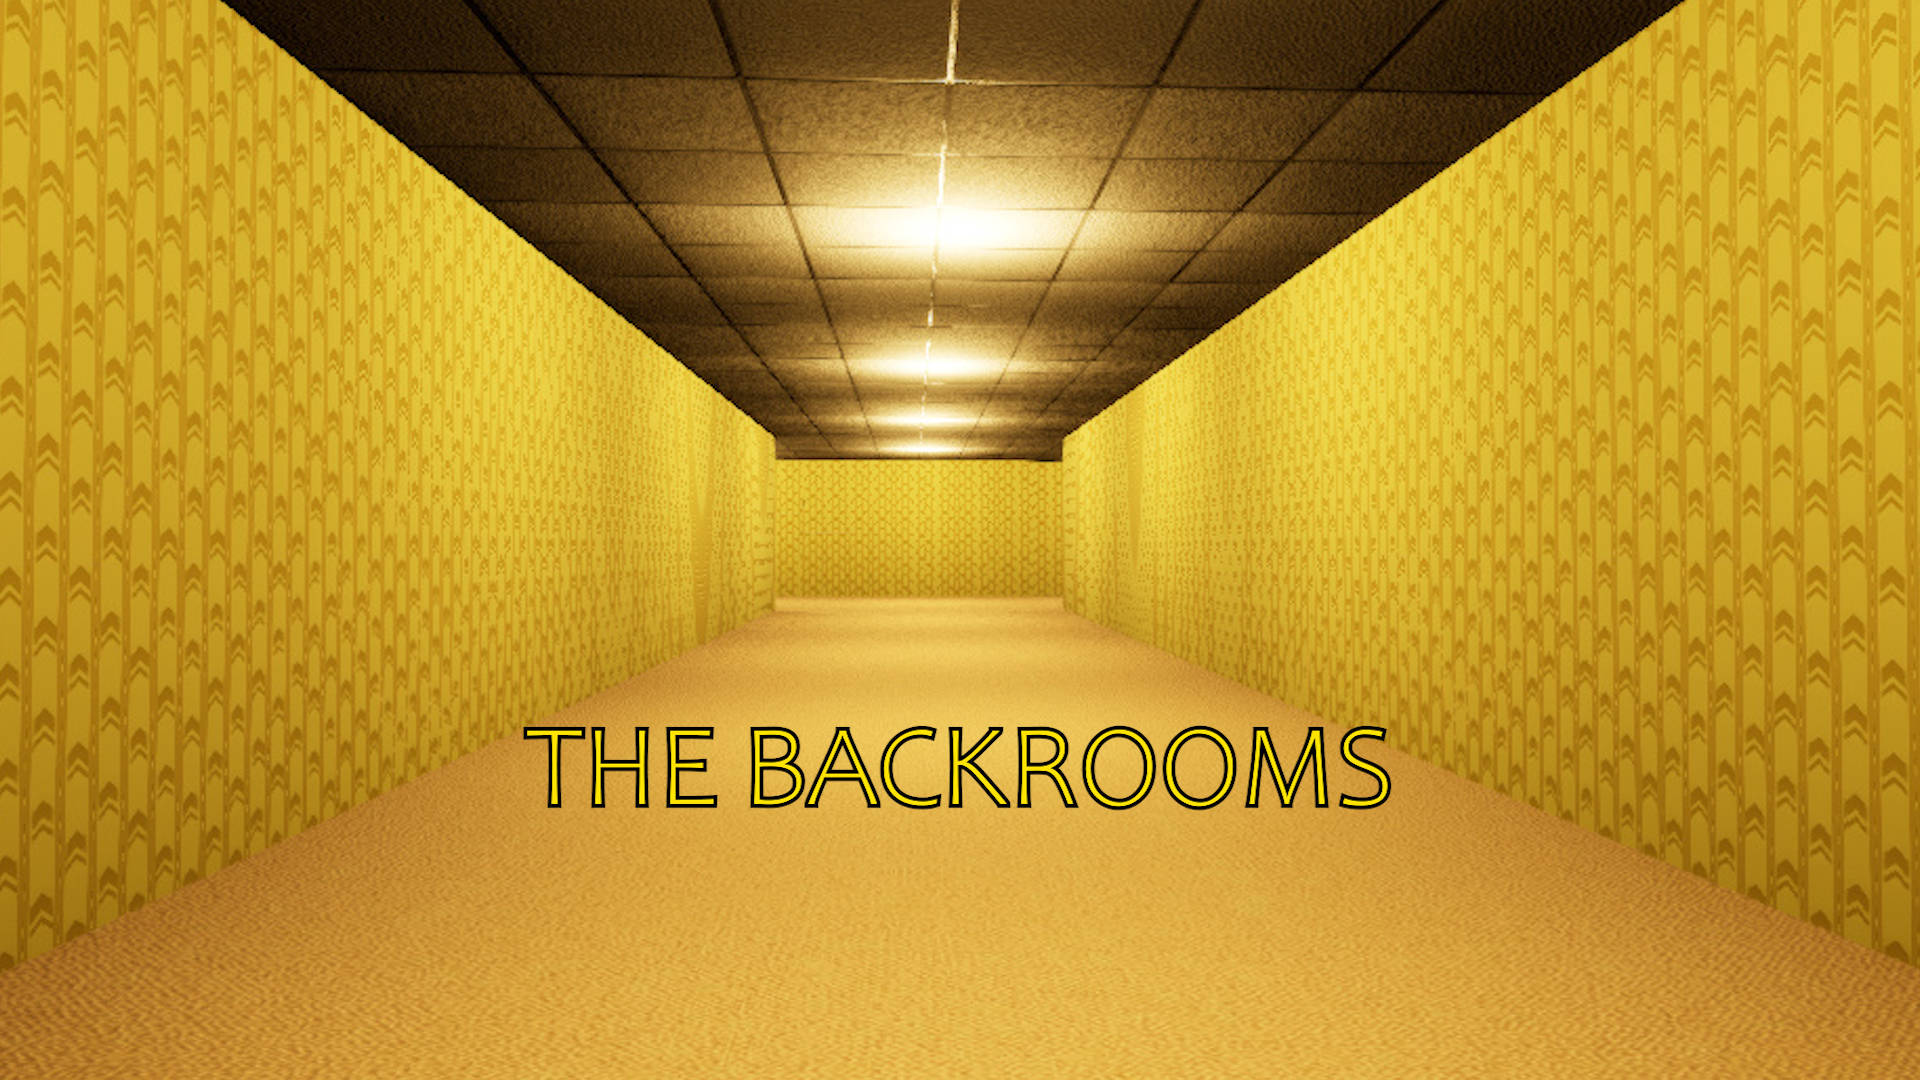 Free The Backrooms Wallpaper Downloads, [100+] The Backrooms Wallpapers for  FREE 